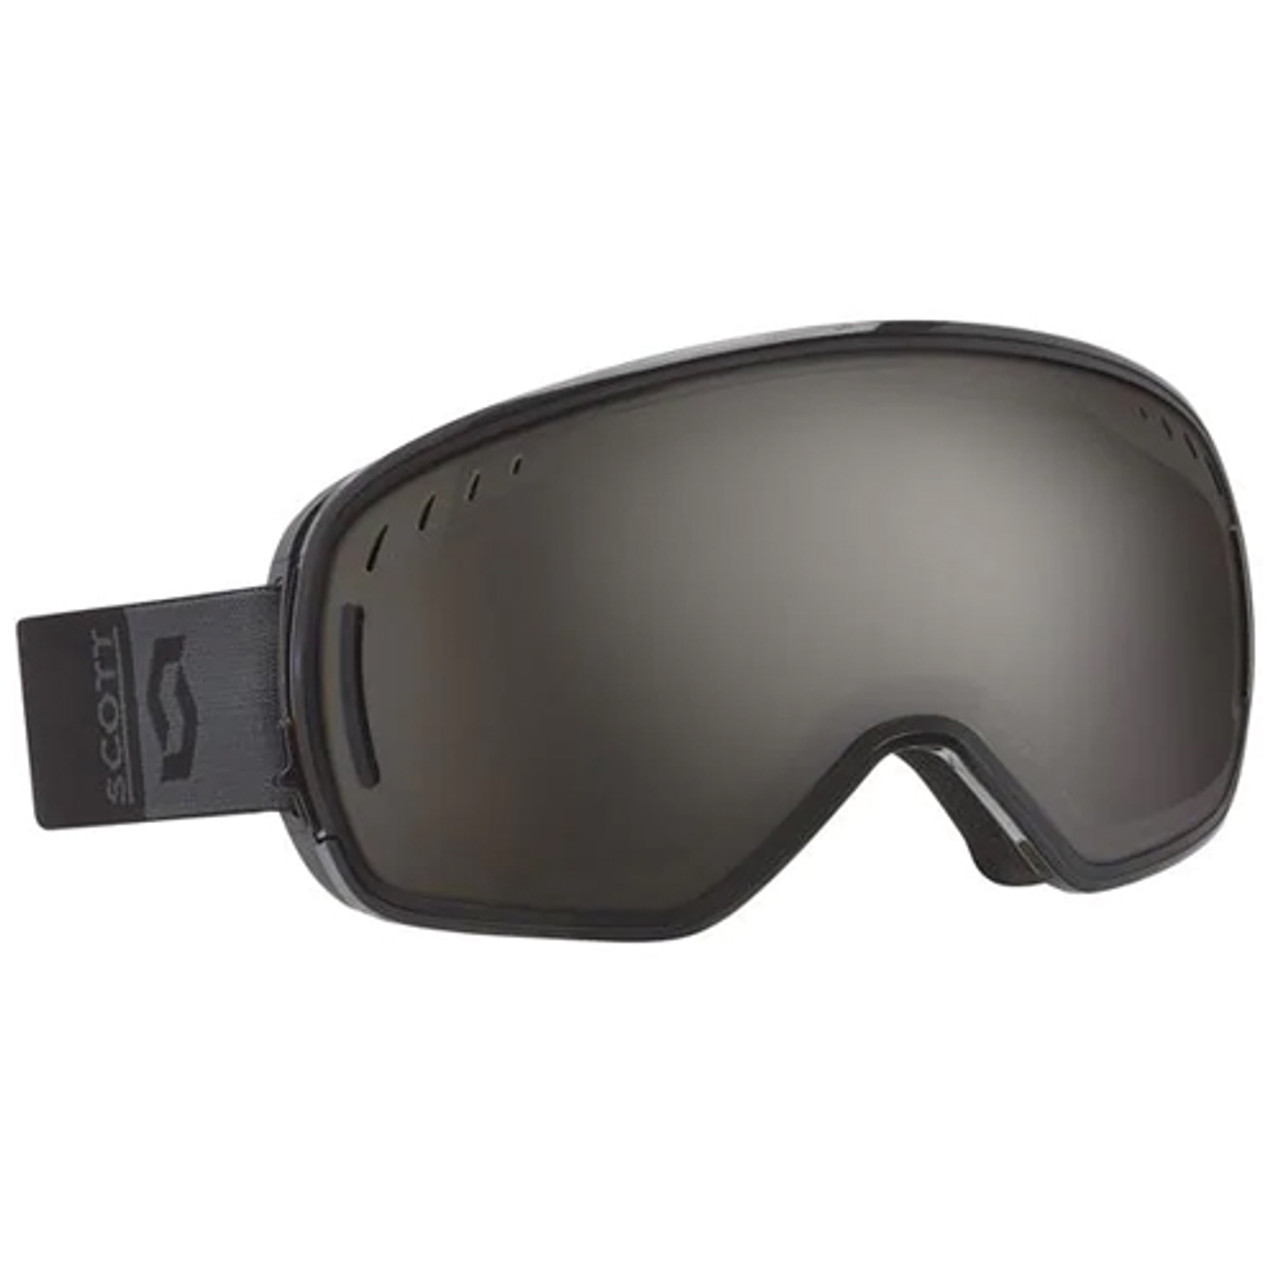 Extra lenses for Scott LCG Ski and Snowboard Goggles